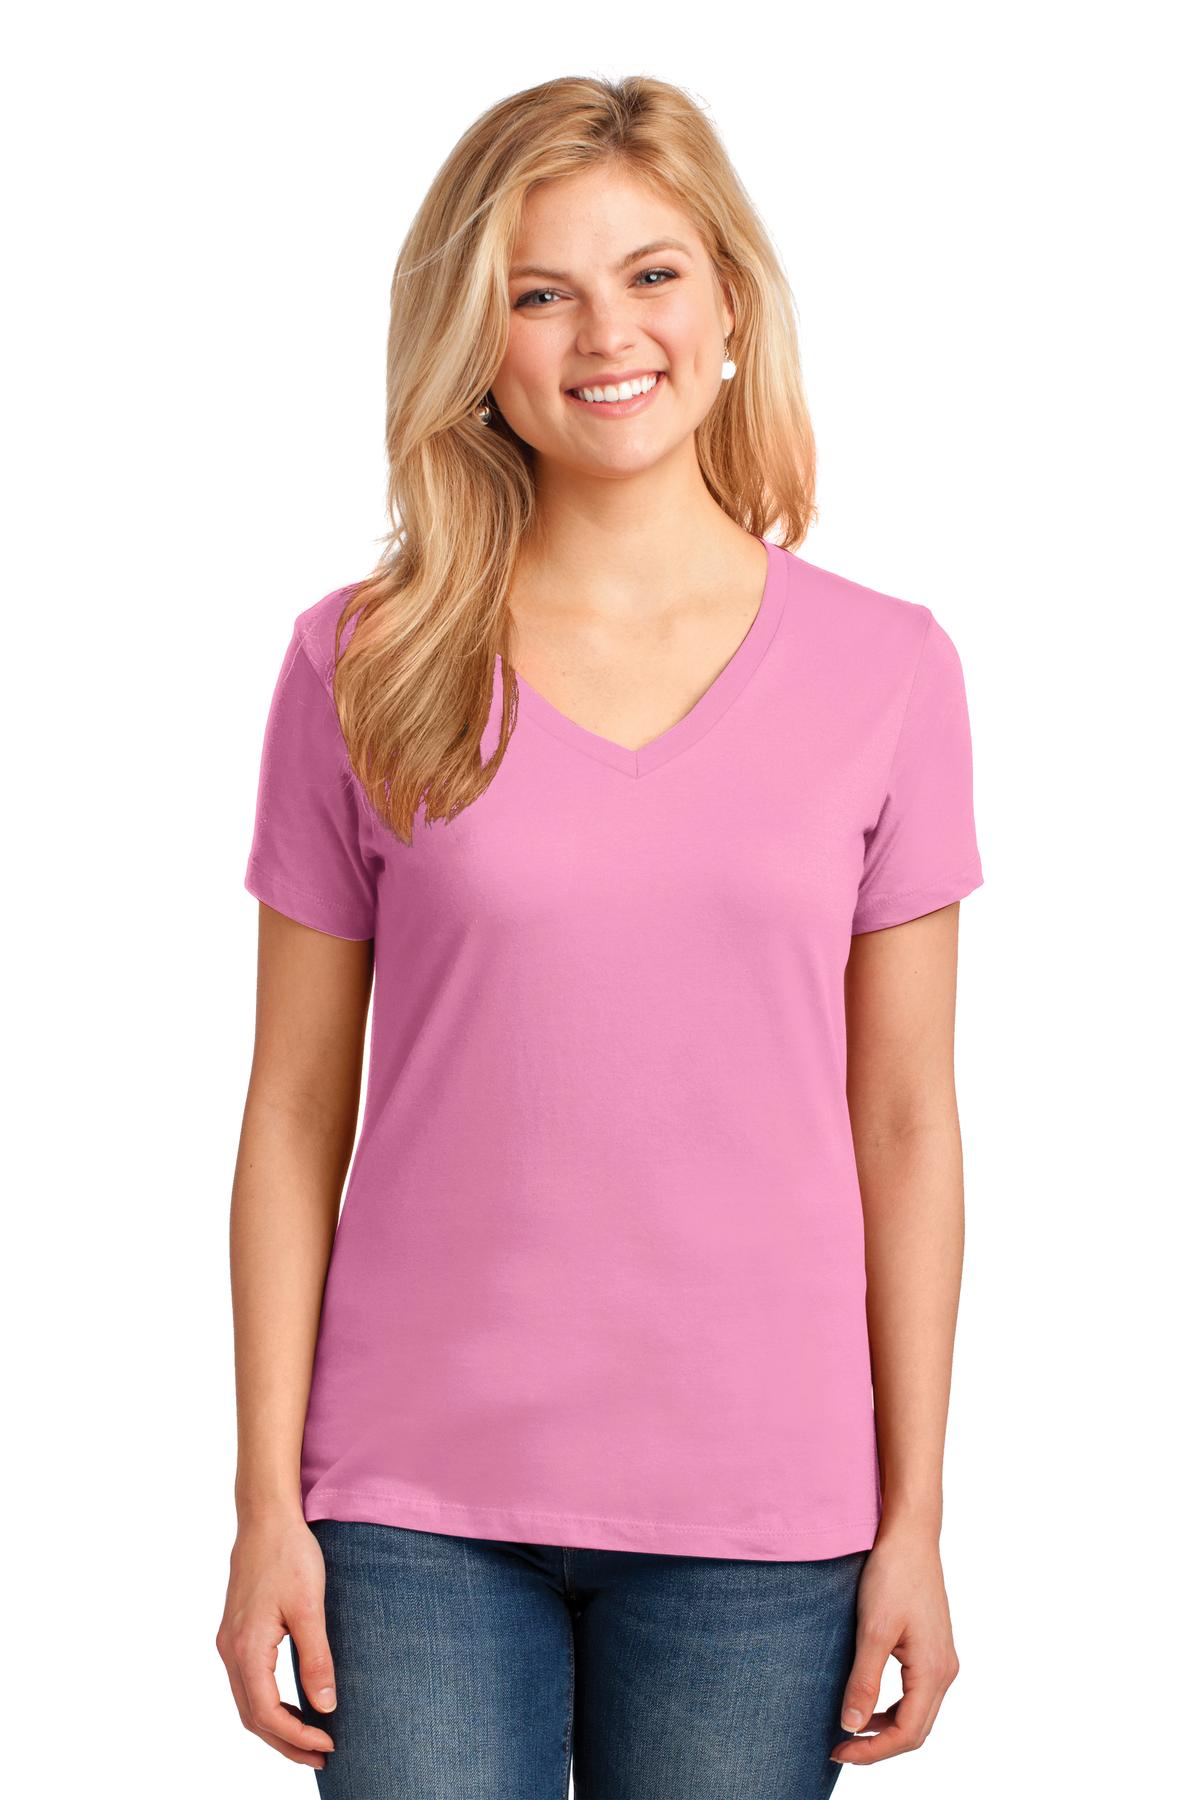 Photo of Port & Company Ladies LPC54V  color  Candy Pink